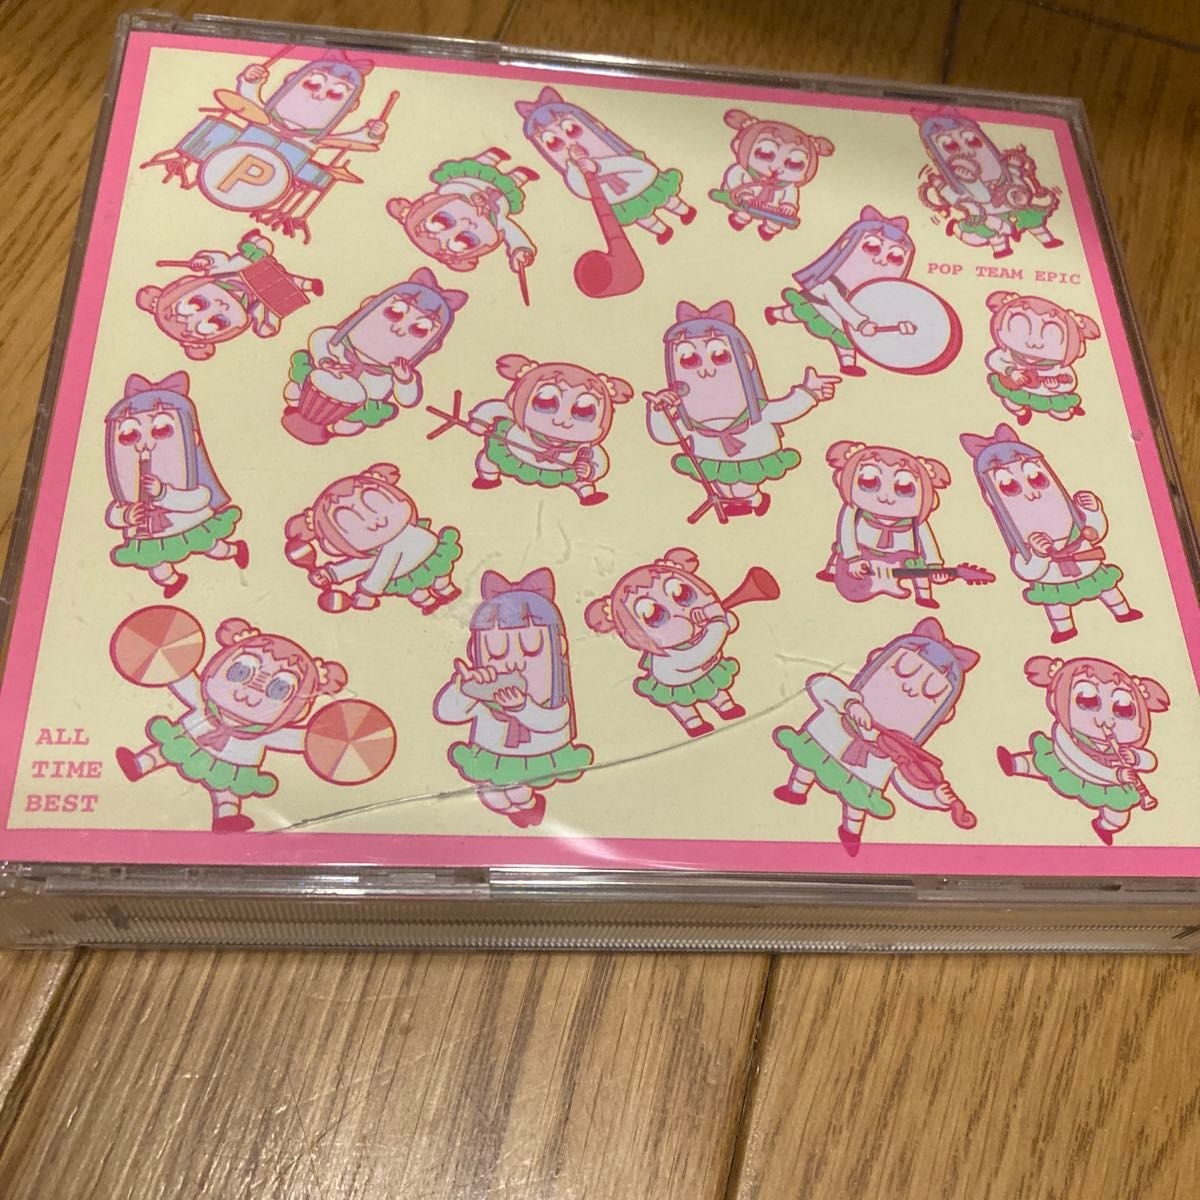 CD「ポプテピピック ALL TIME BEST POP TEAM EPIC」